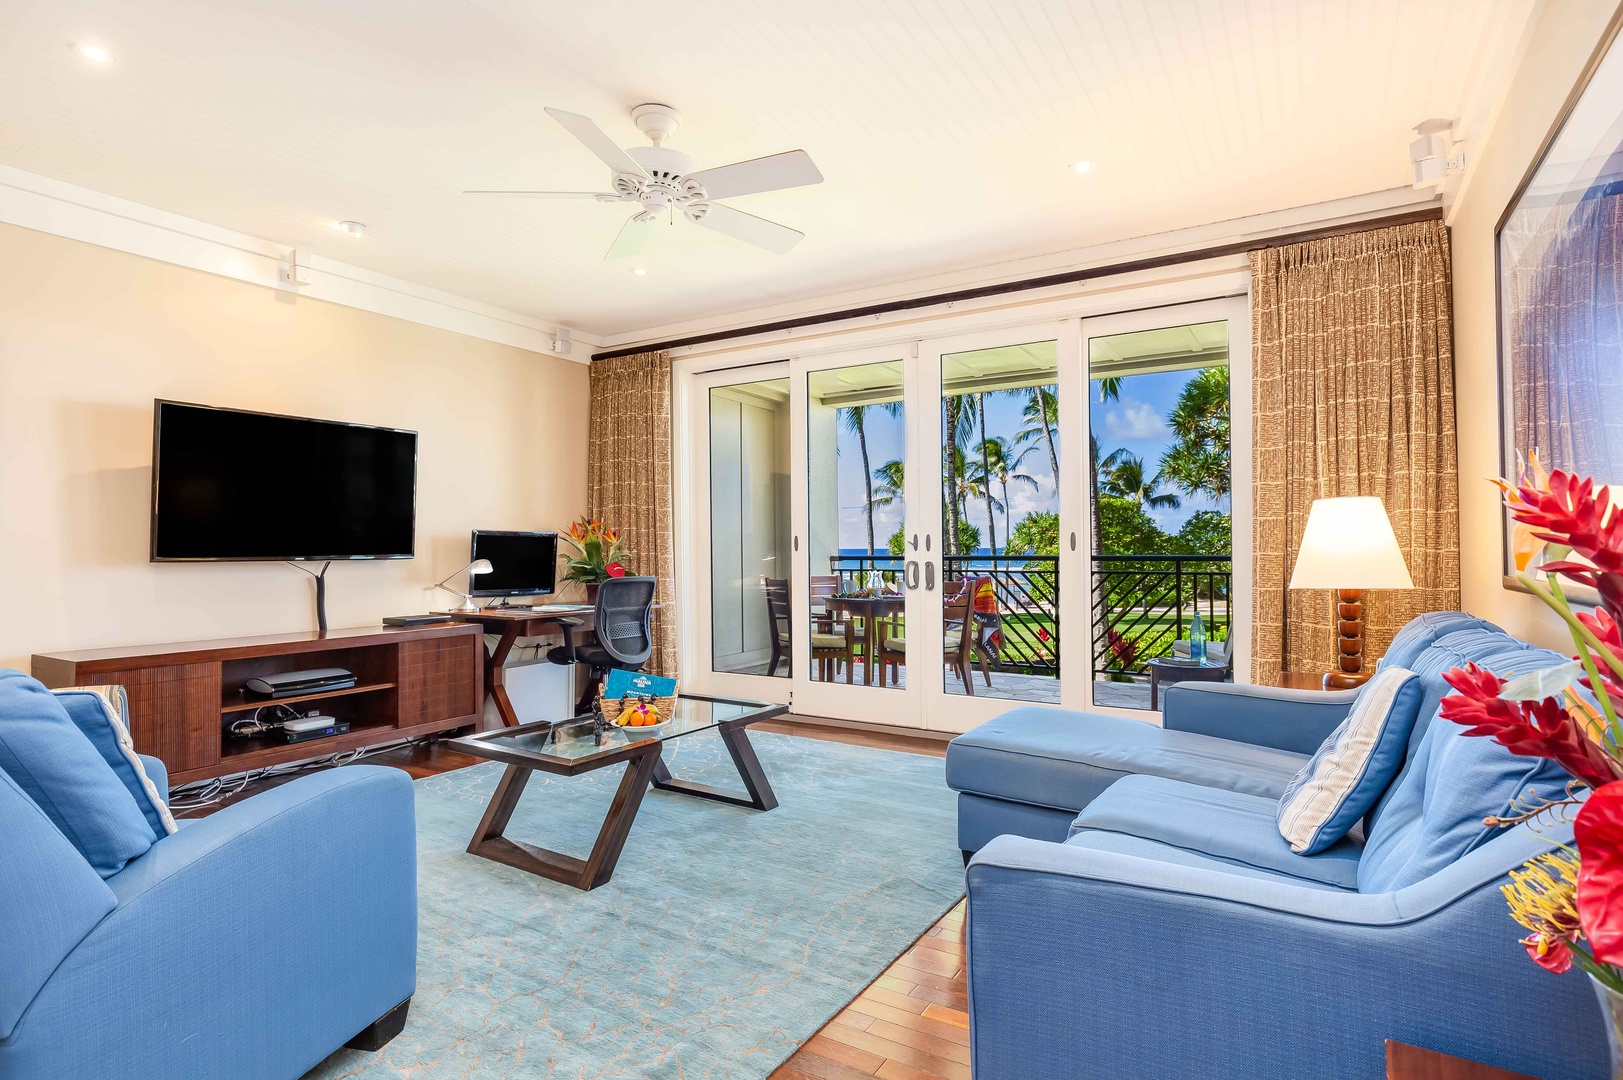 Kahuku Vacation Rentals, Turtle Bay Villas 205/206 - Featuring comforts such as central air conditioning, complimentary wireless internet service, and two large-capacity washers and dryers (one in each unit).